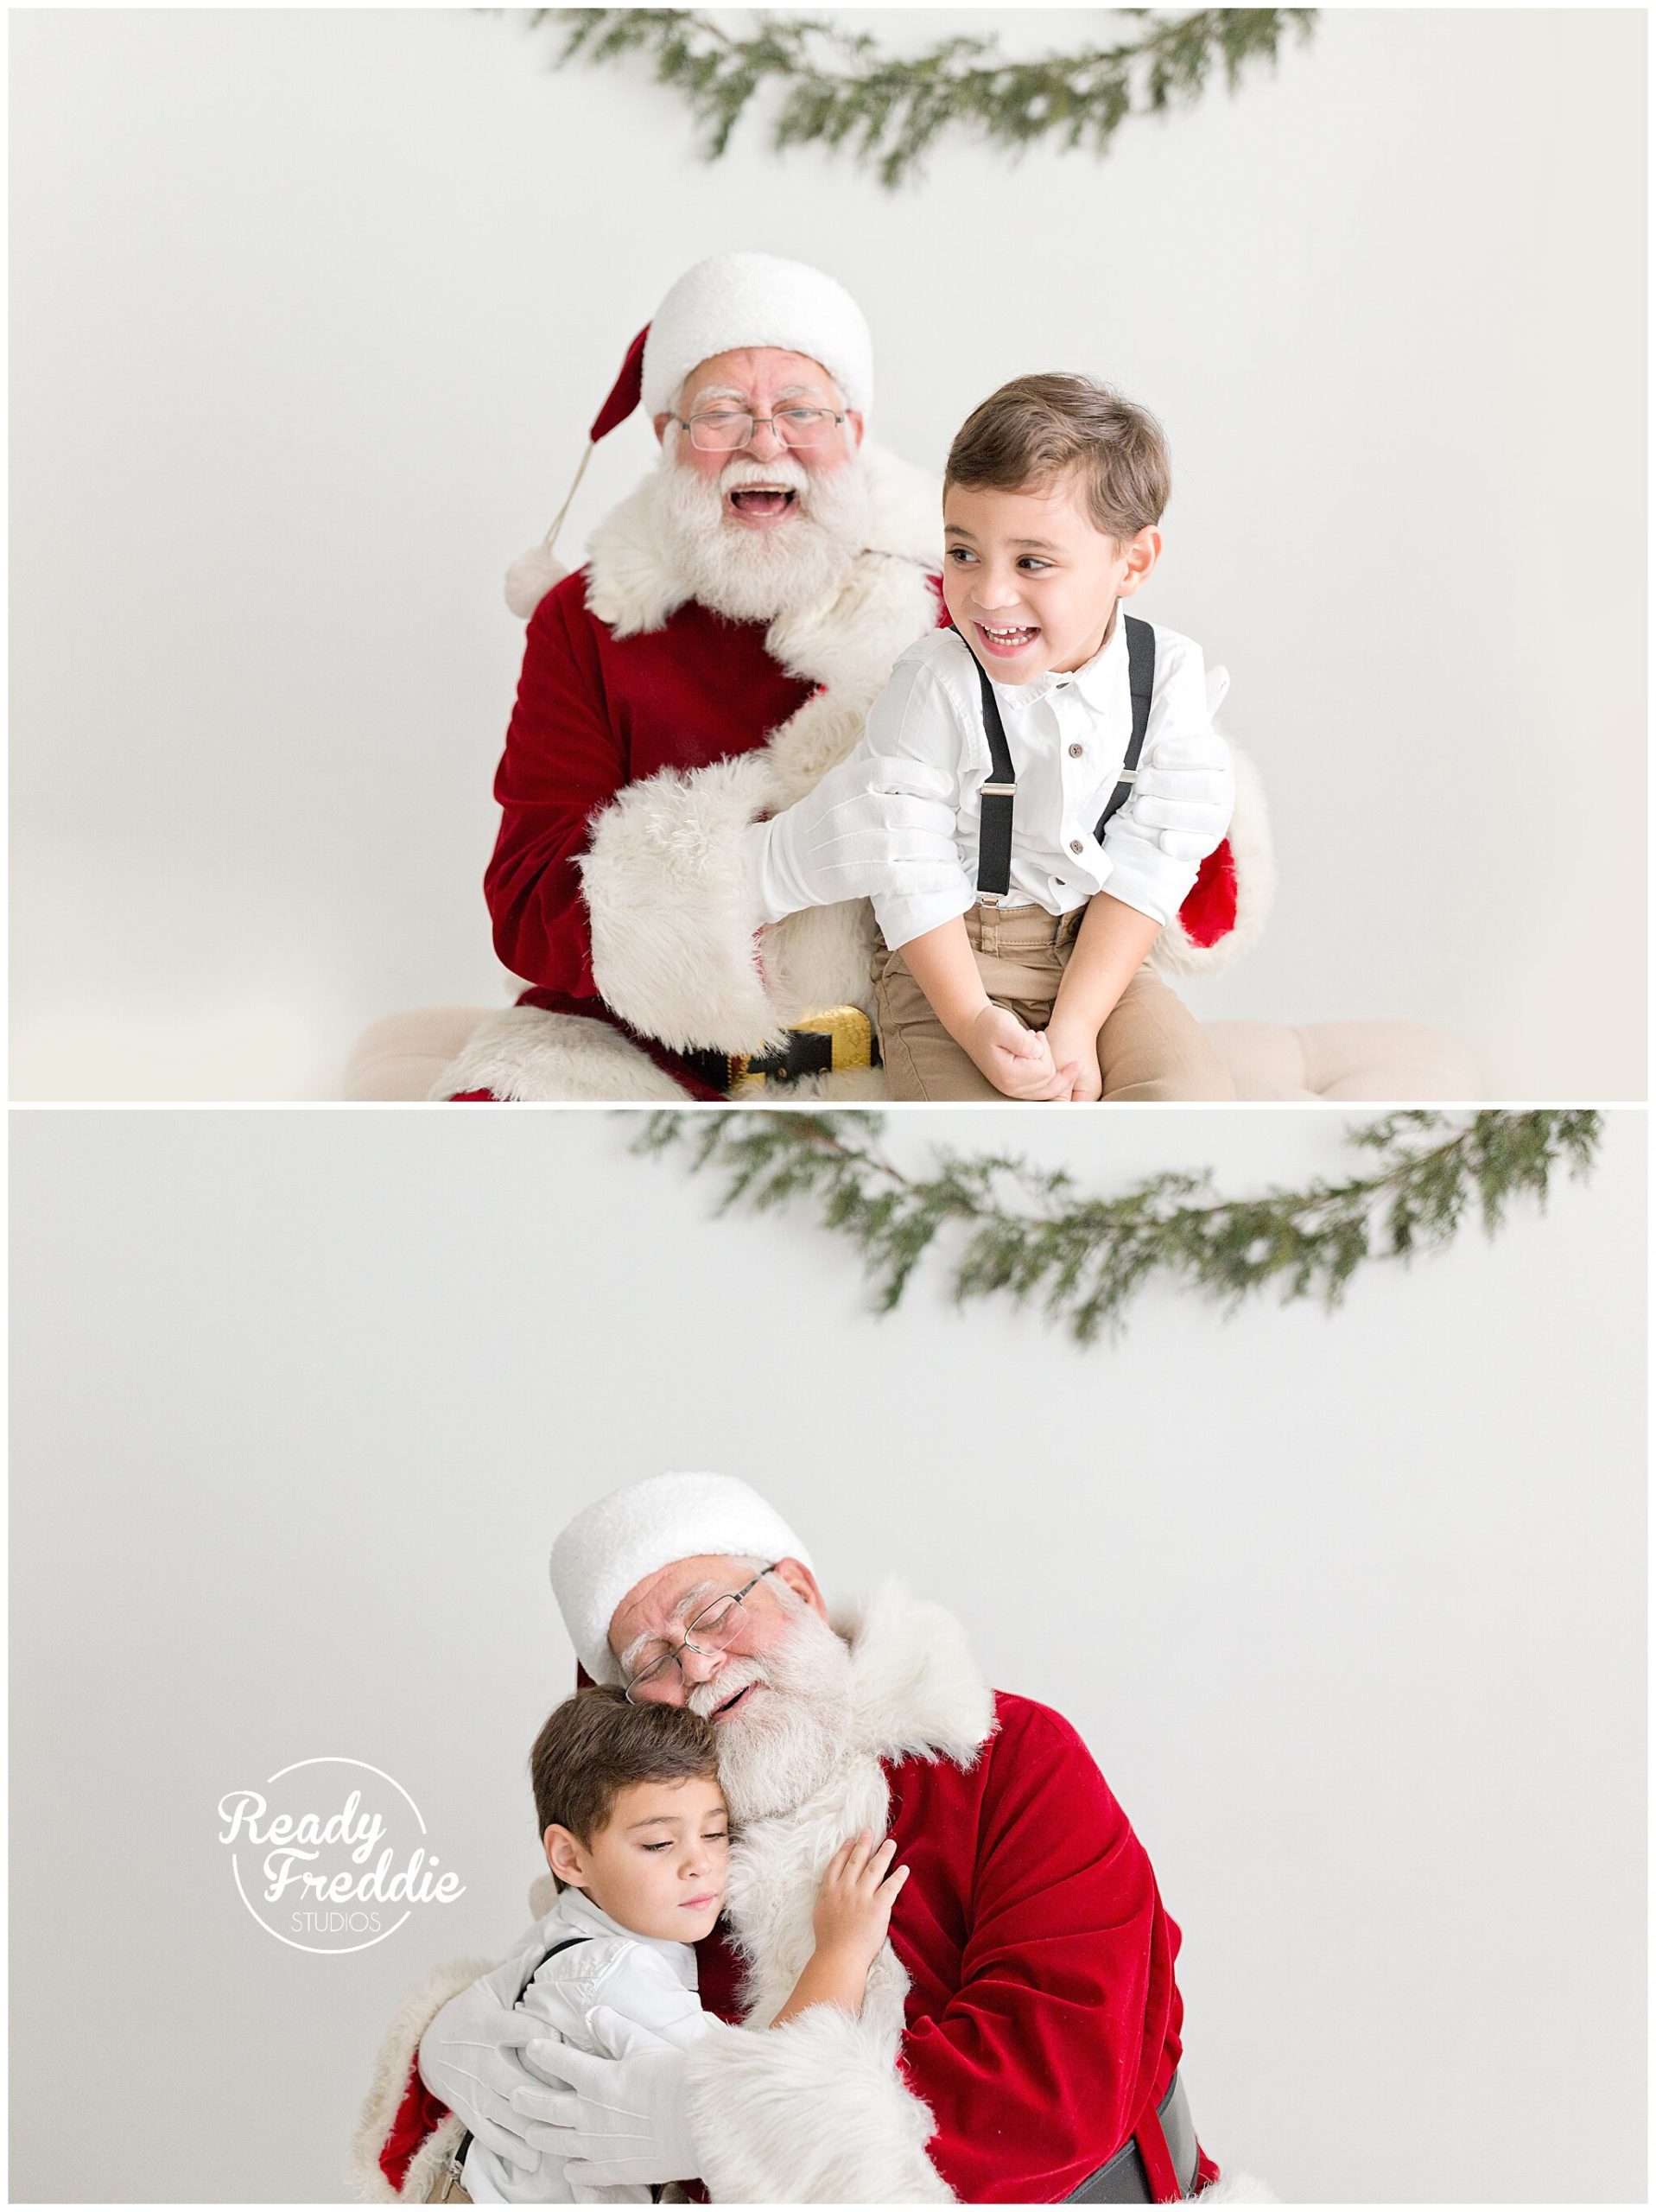 Cute pictures with Santa for the Holidays | Ready Freddie Studios Miami, FL